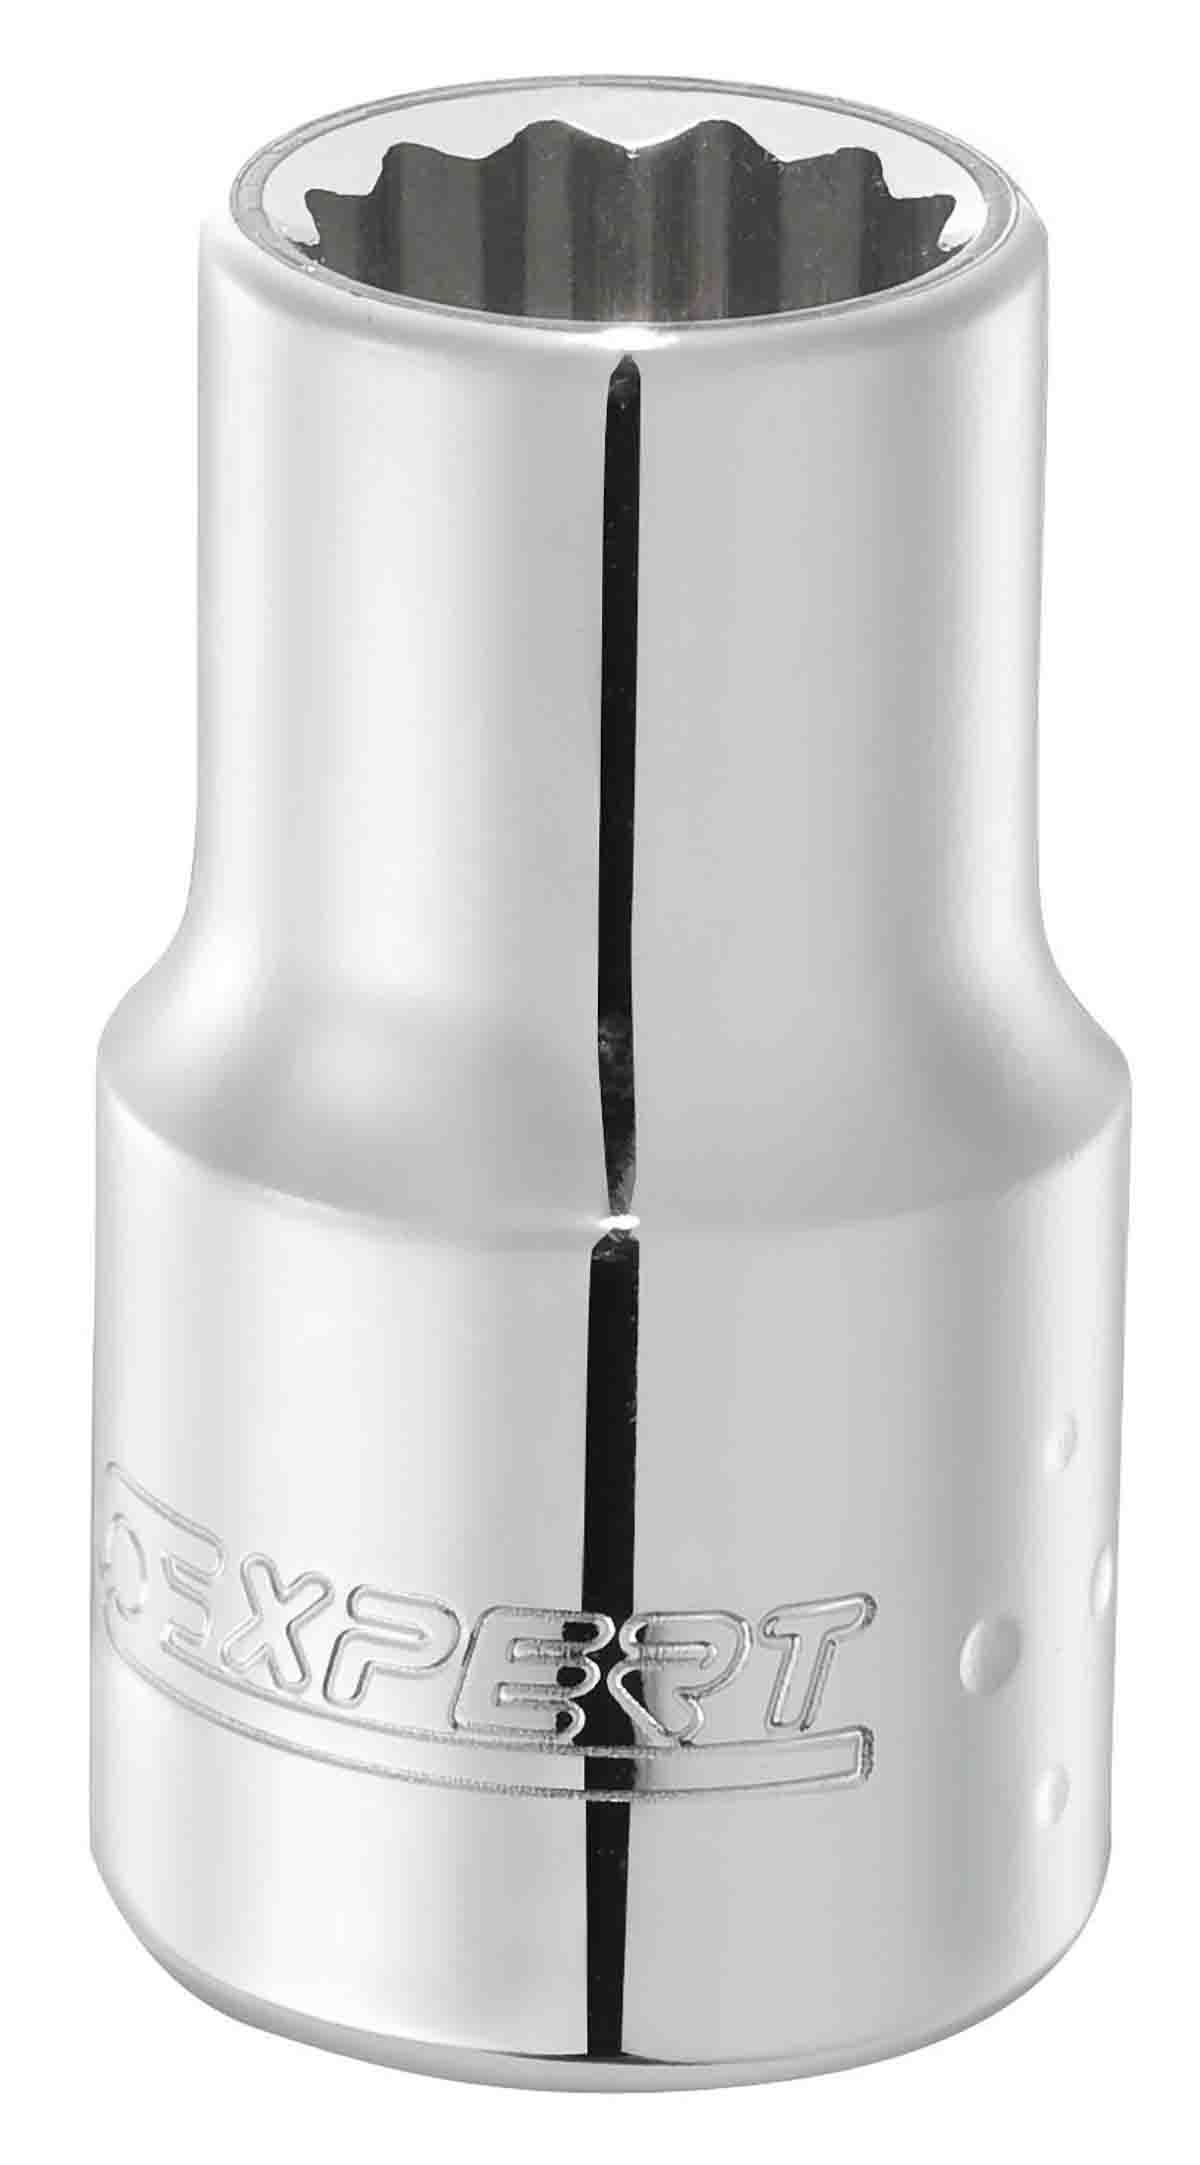 Expert by Facom 18mm Bi-Hex Socket With 1/2 in Drive , Length 38 mm